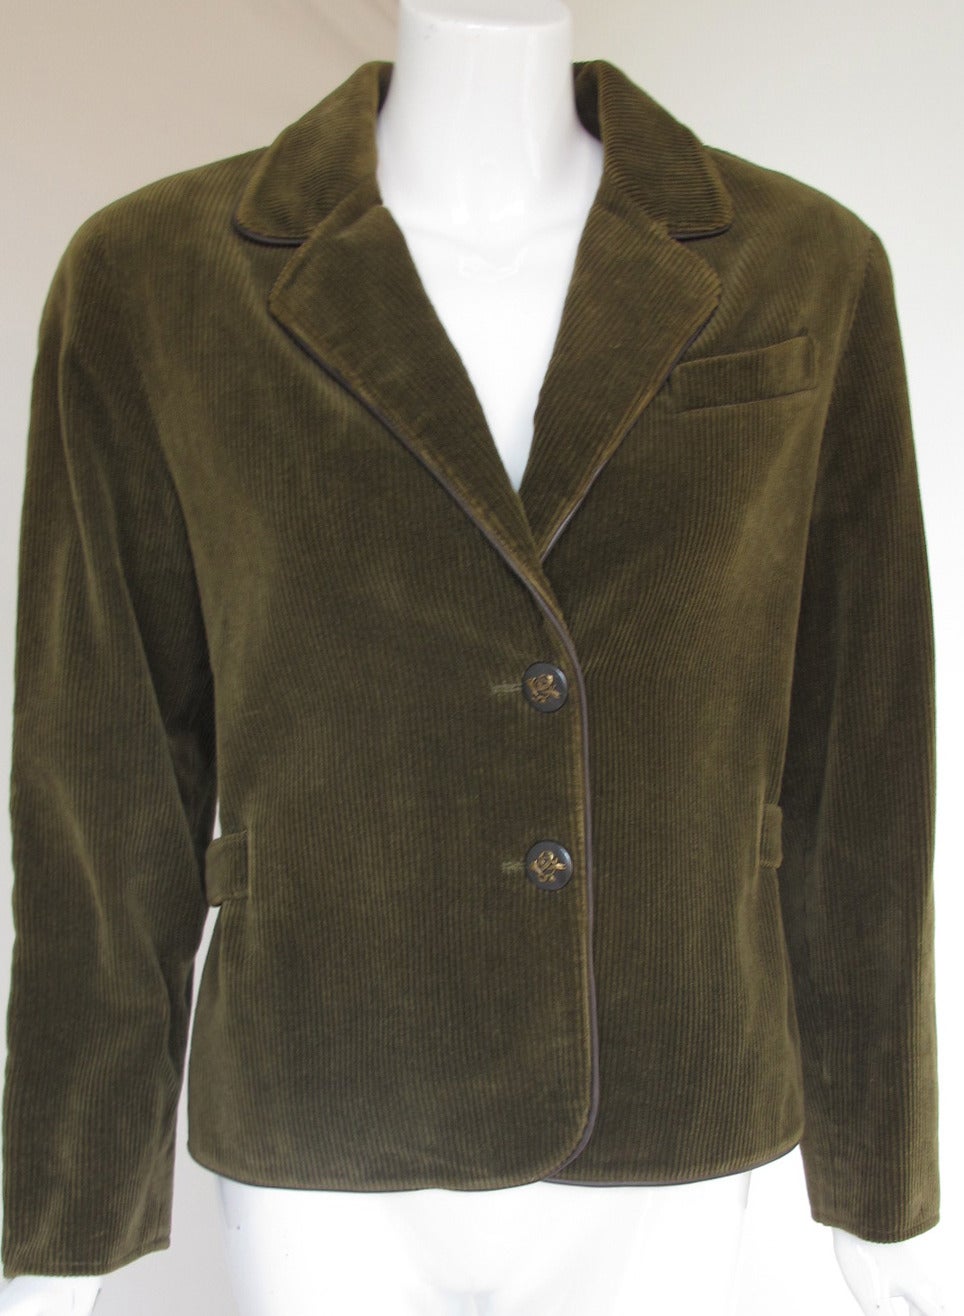 A vintage Hermes olive green corduroy jacket with leather piping and Hermes metal 